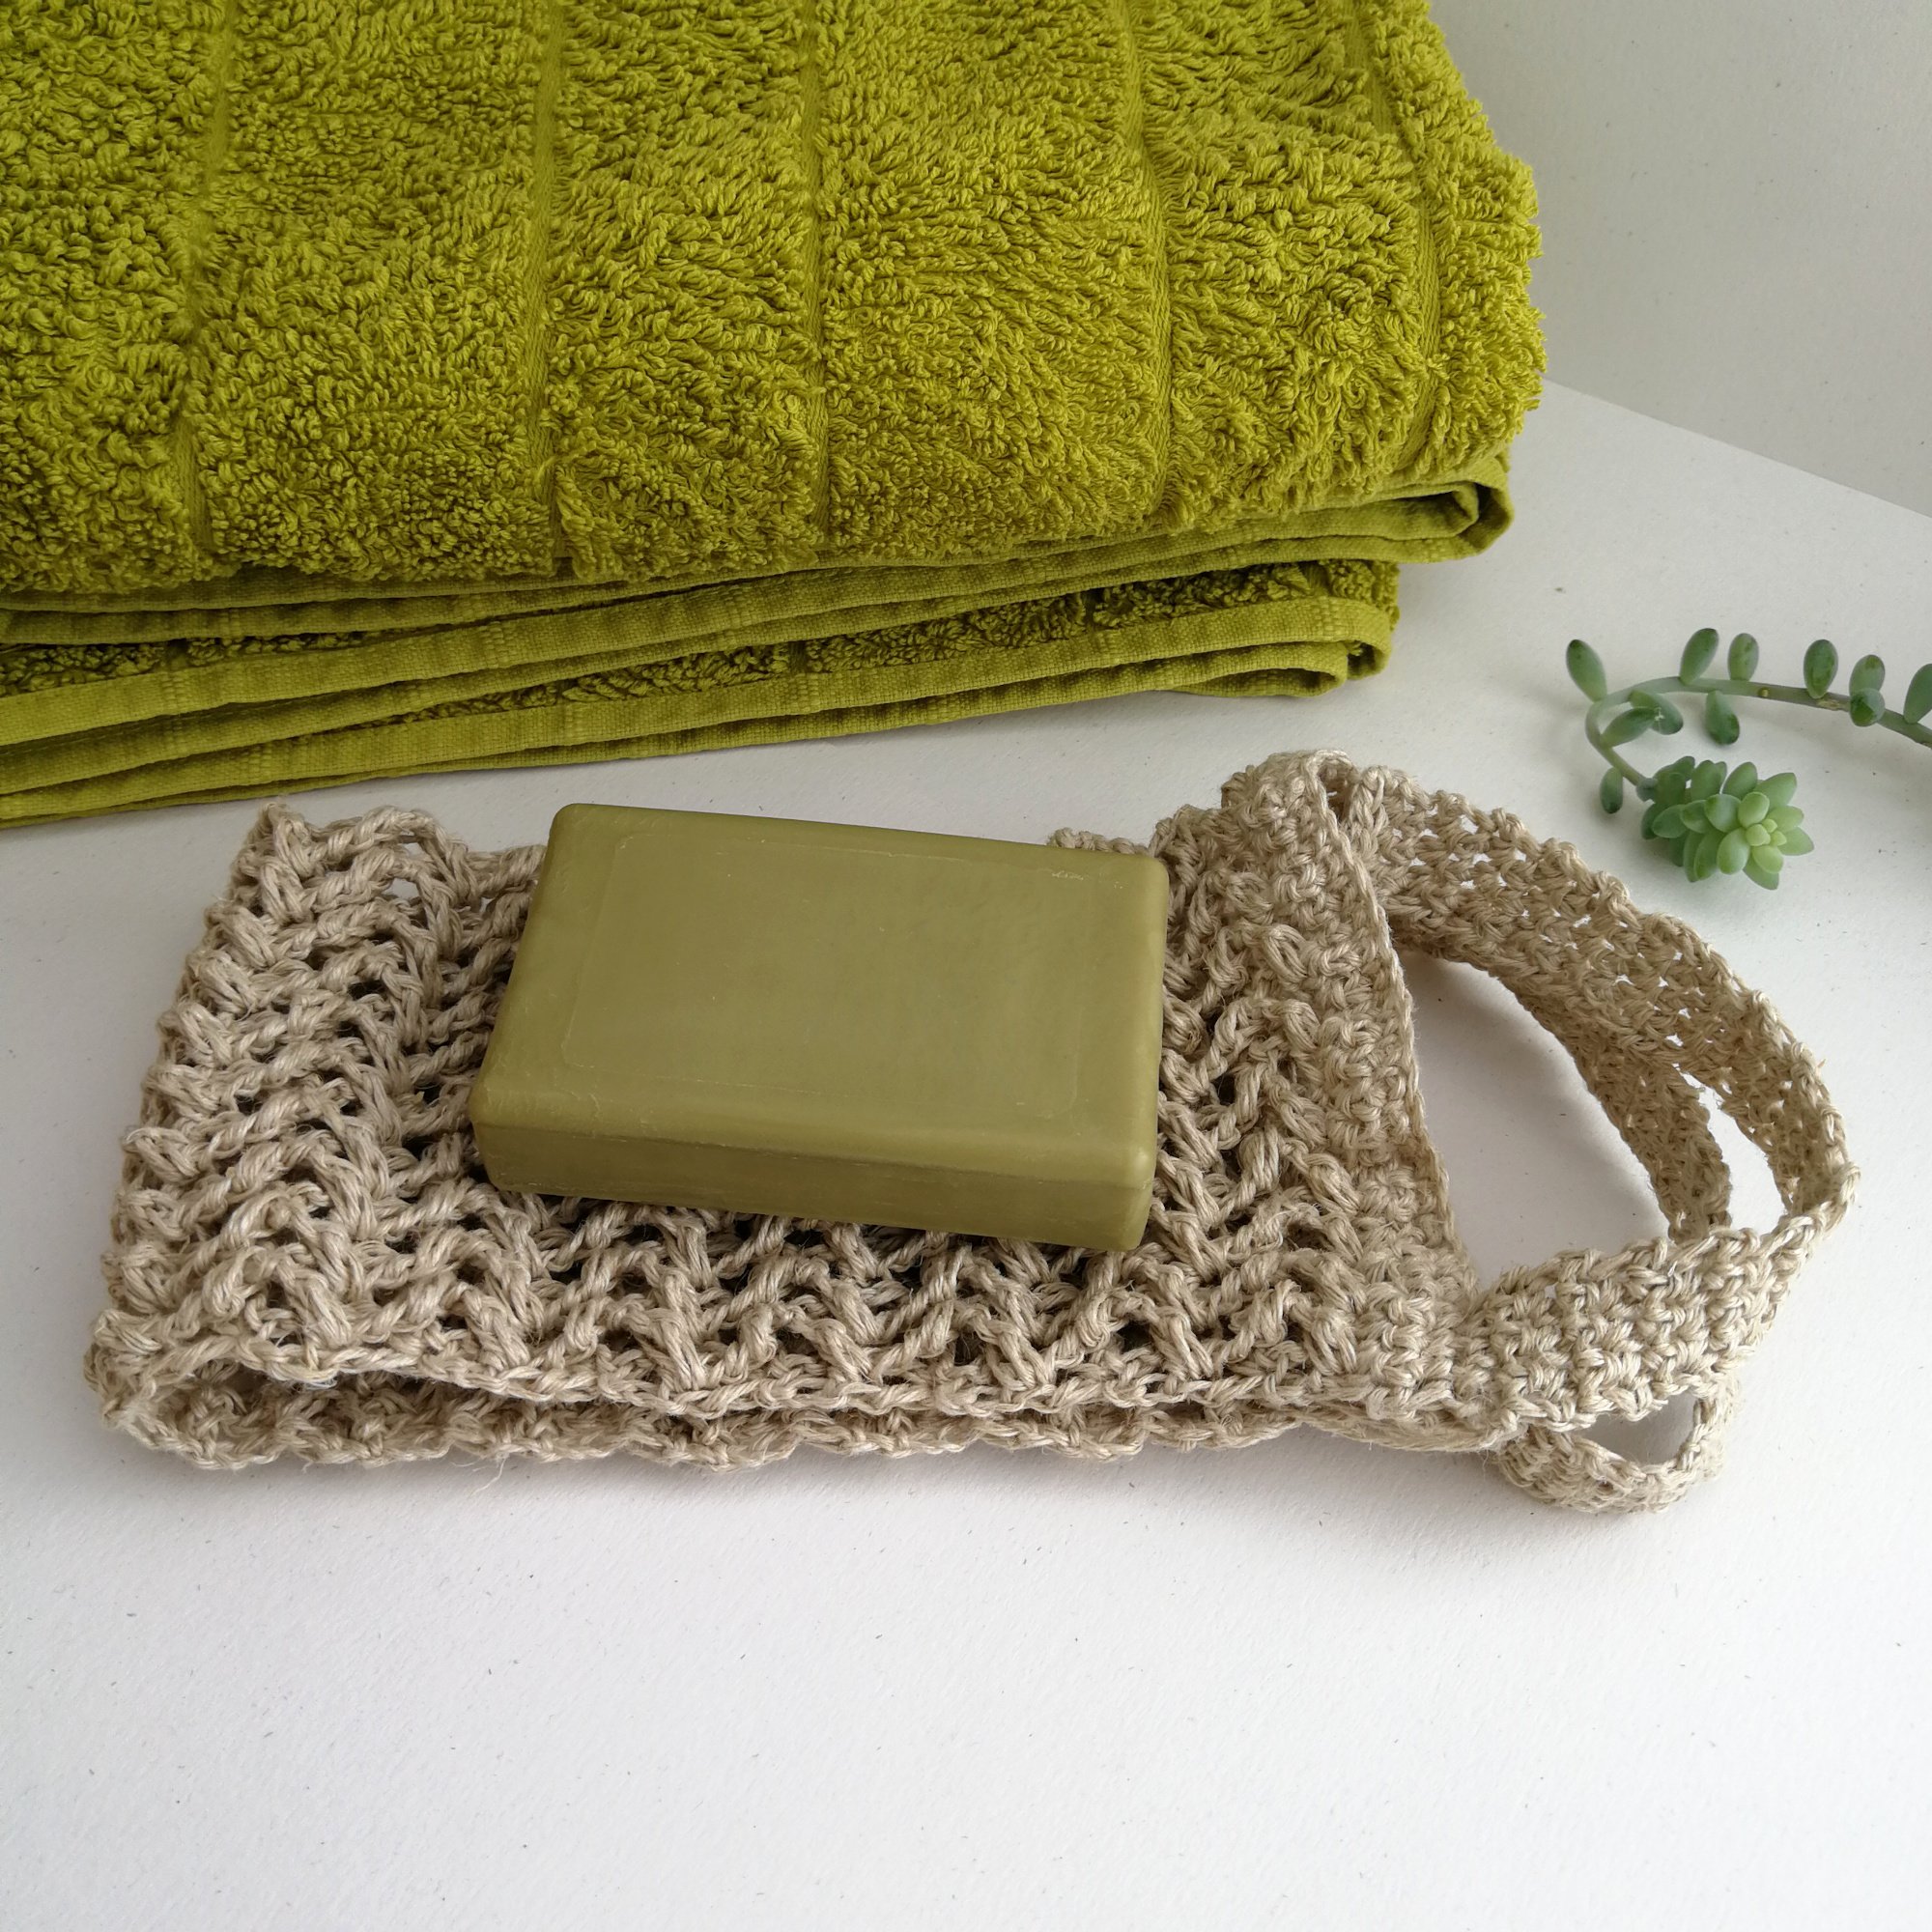 The back scrubber is folded in half & placed on a white table. The two sides are sat aside from each other & have a handle on each side. A green bar of soap is on the left and a green towel is behind.